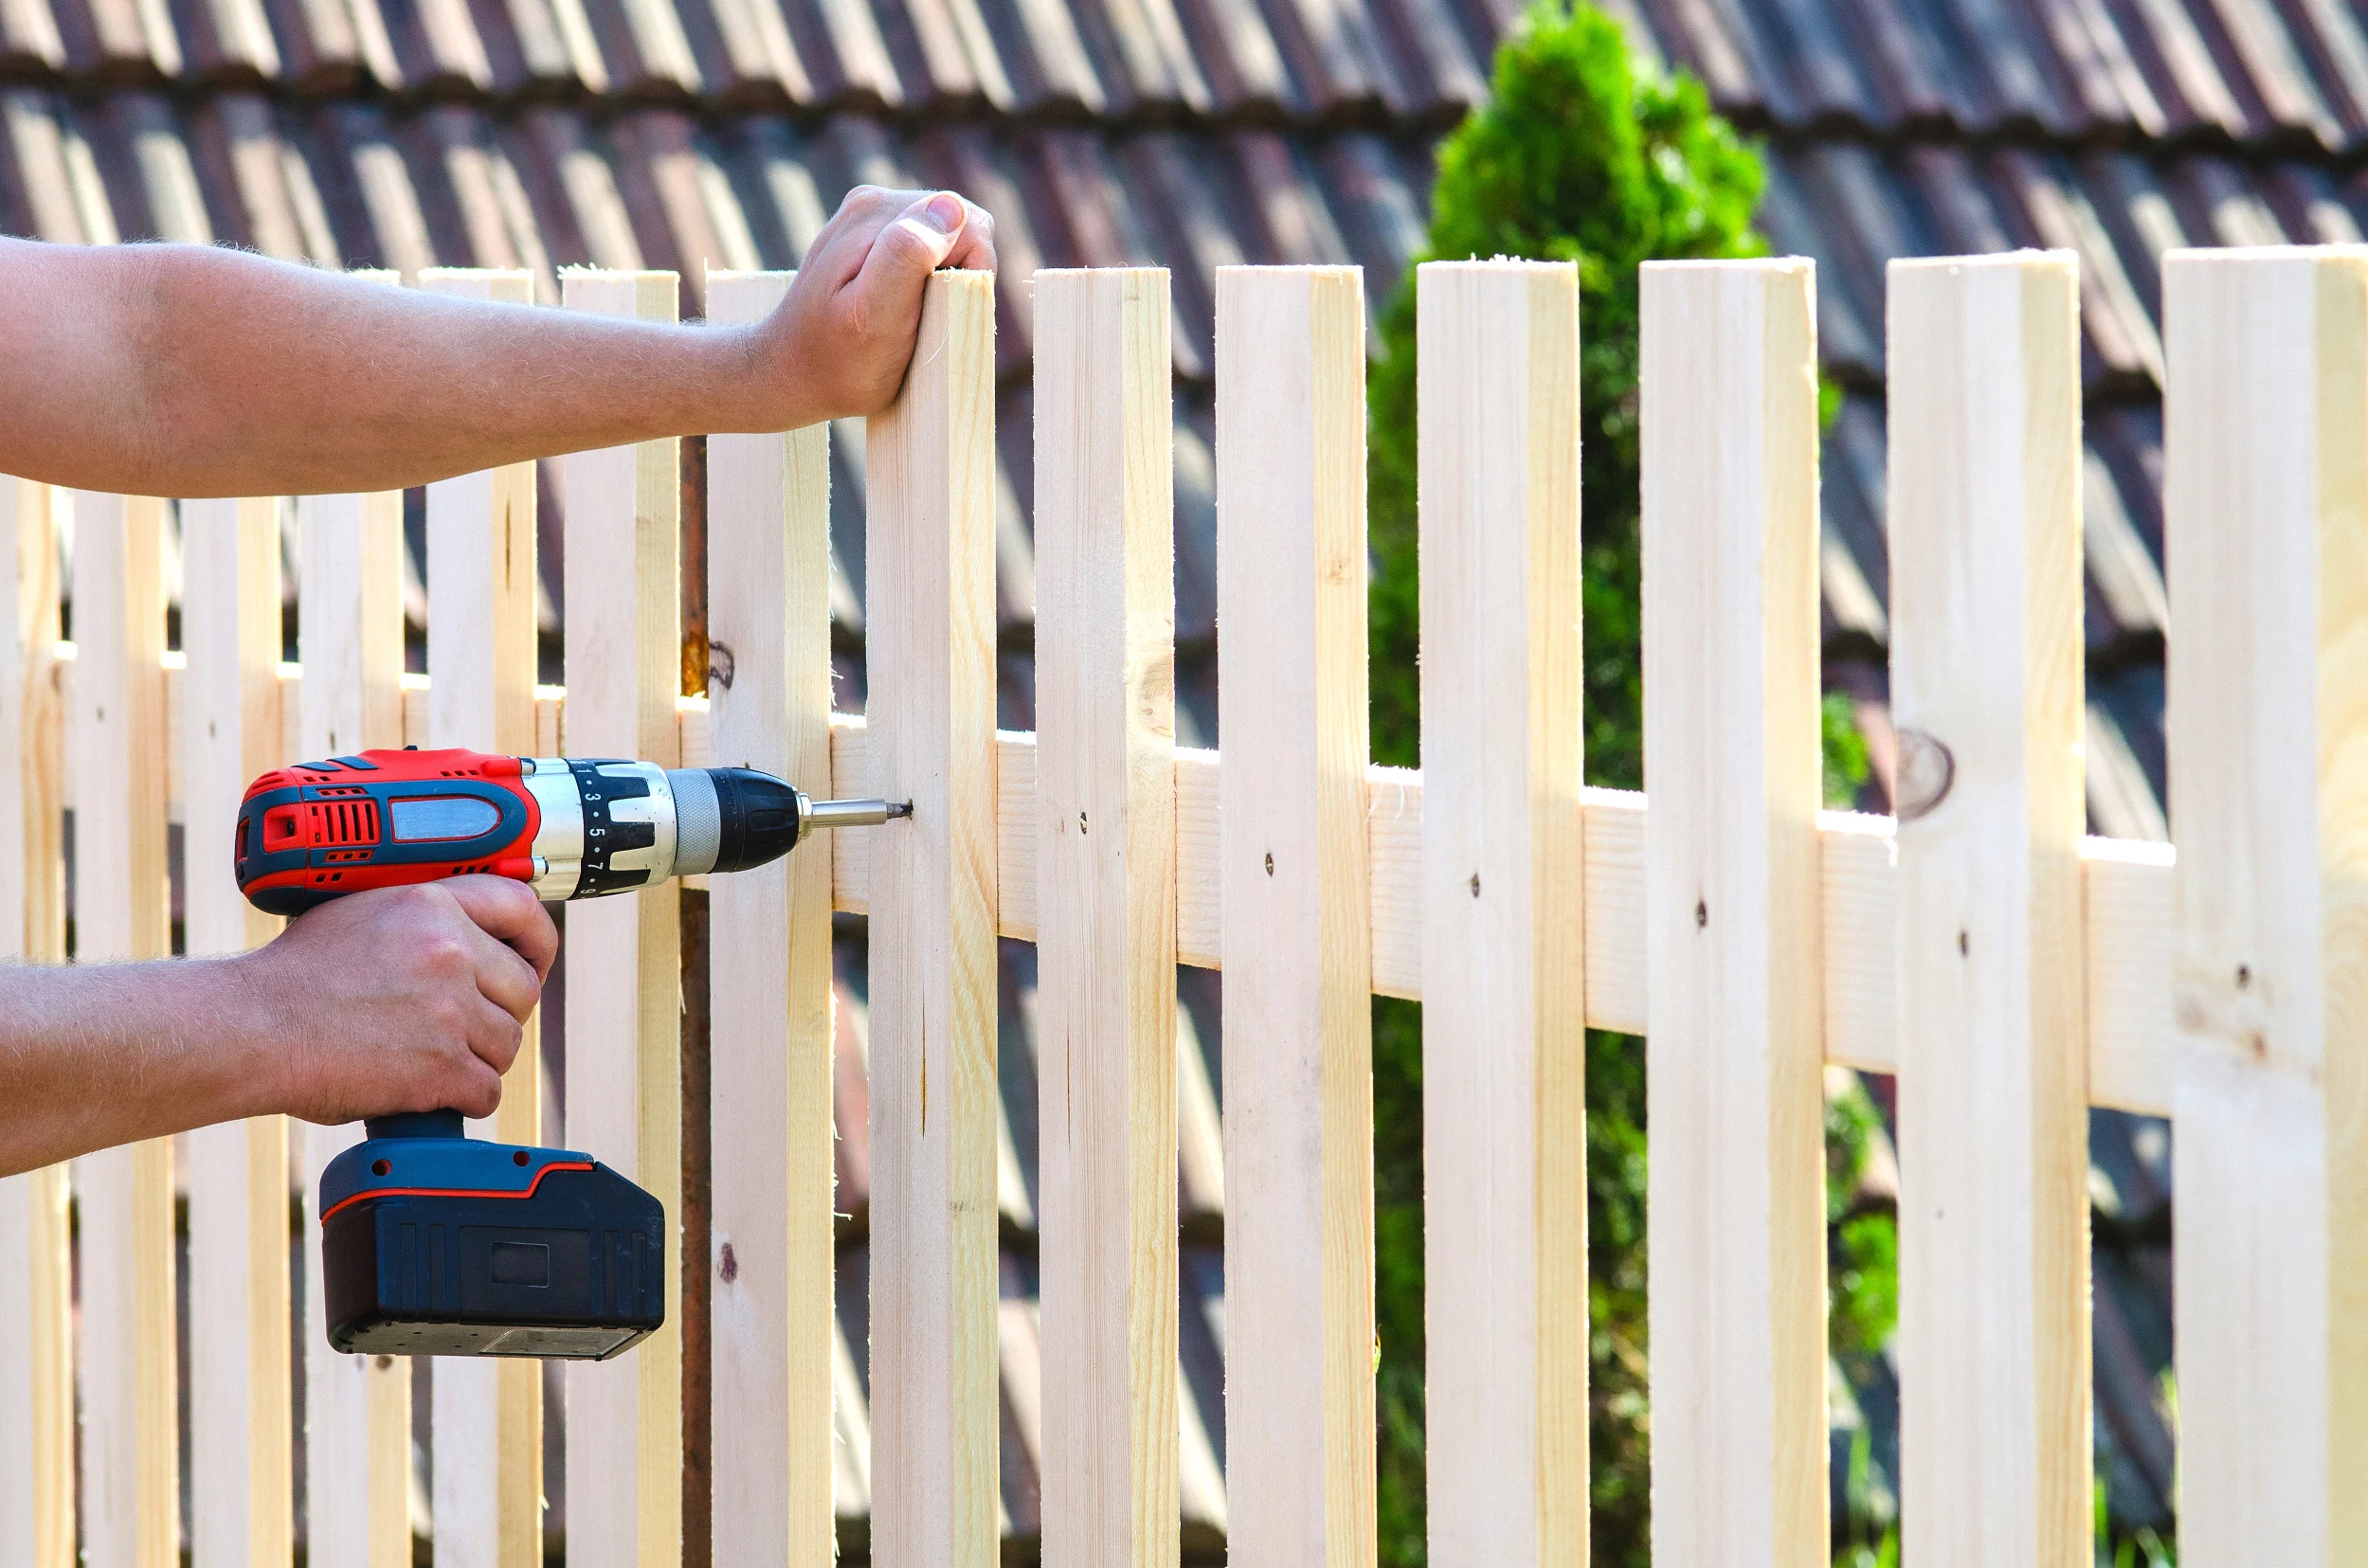 Fence services Pearland TX